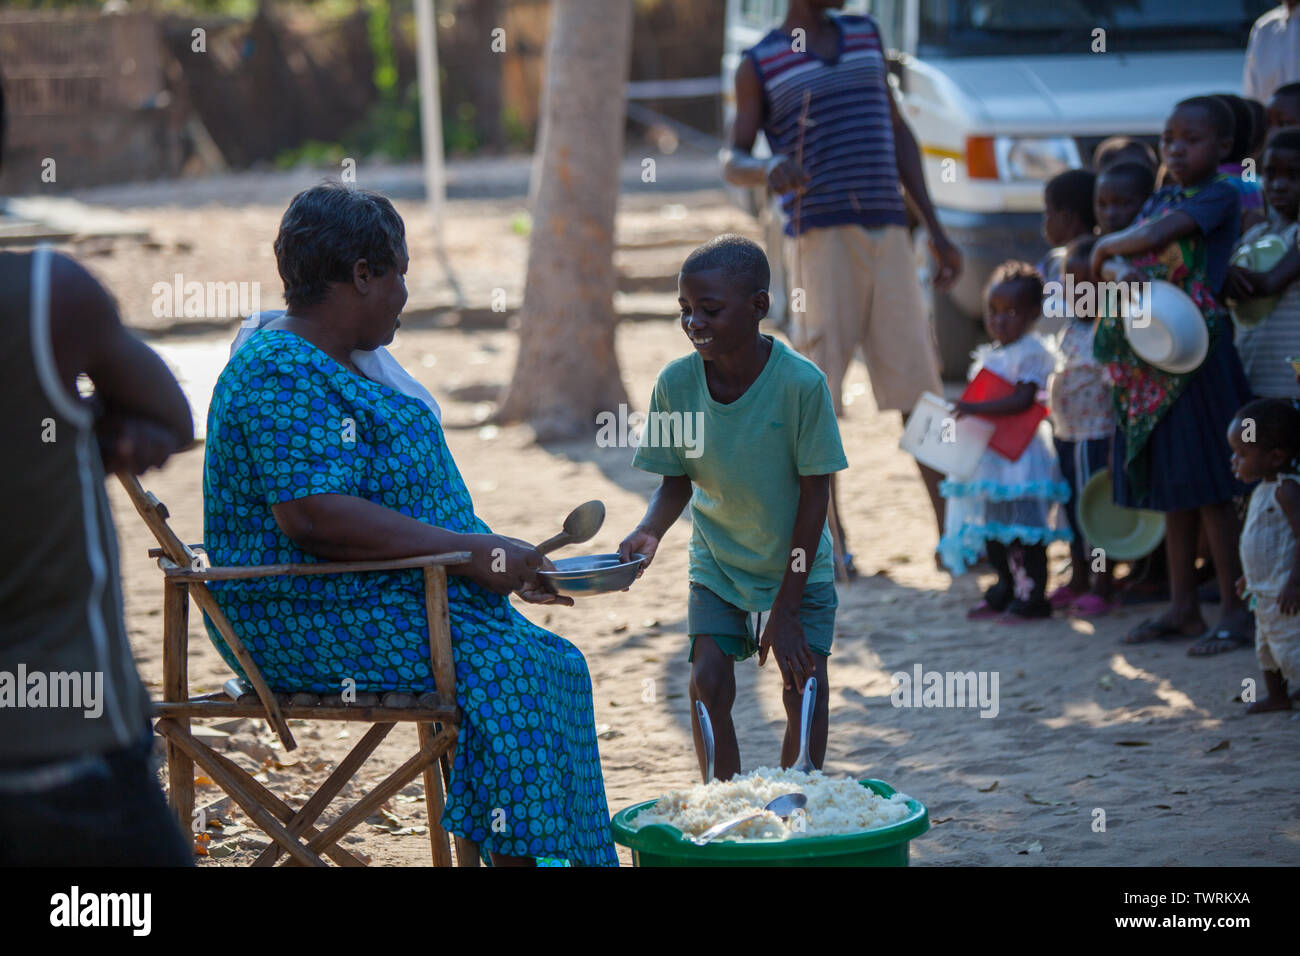 A young boy receiving food from an elderly woman while other children wait in line their turn Stock Photo